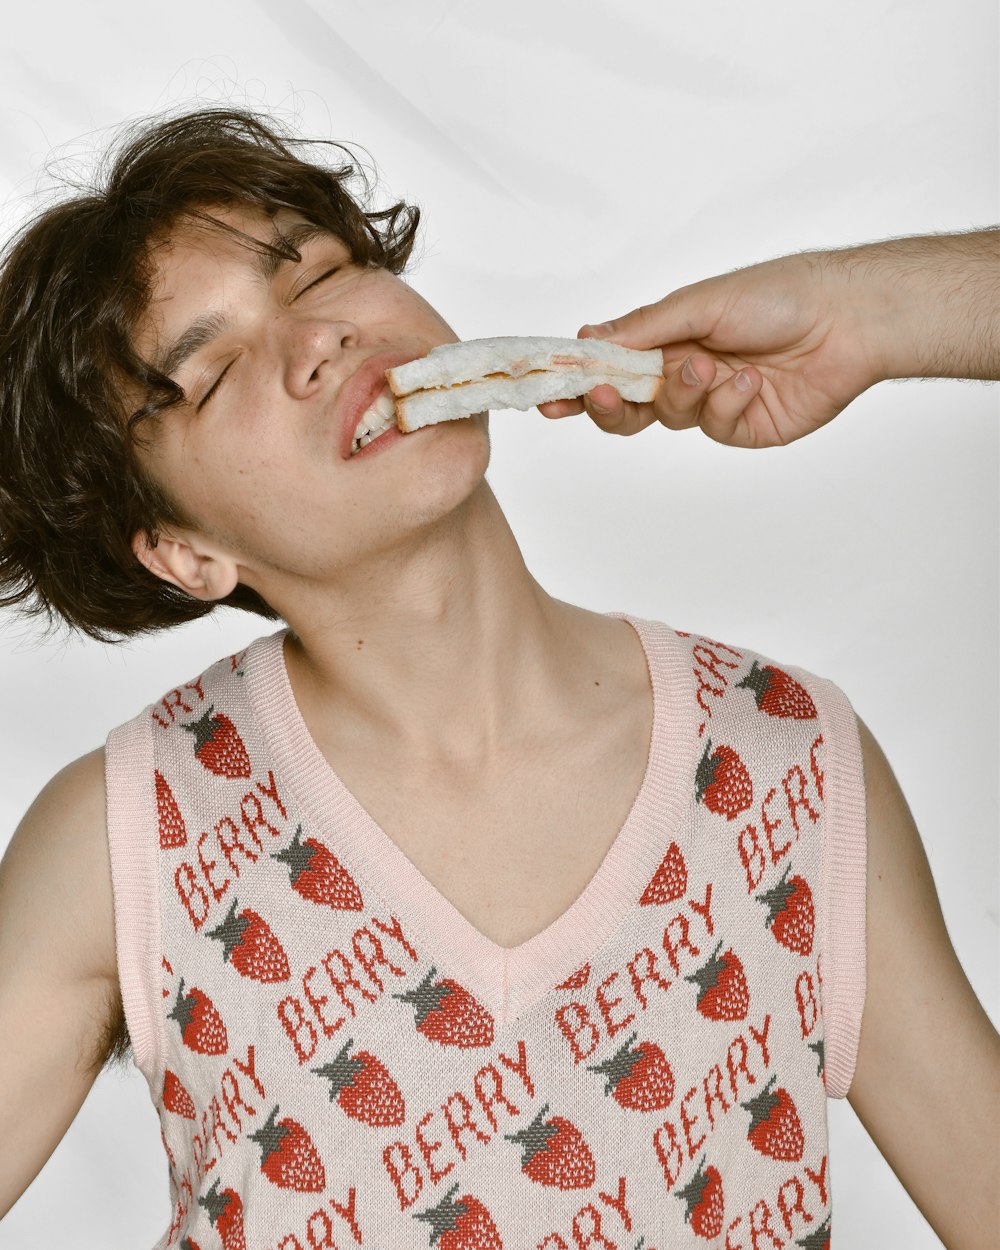 a man eating a donut while wearing a pink shirt